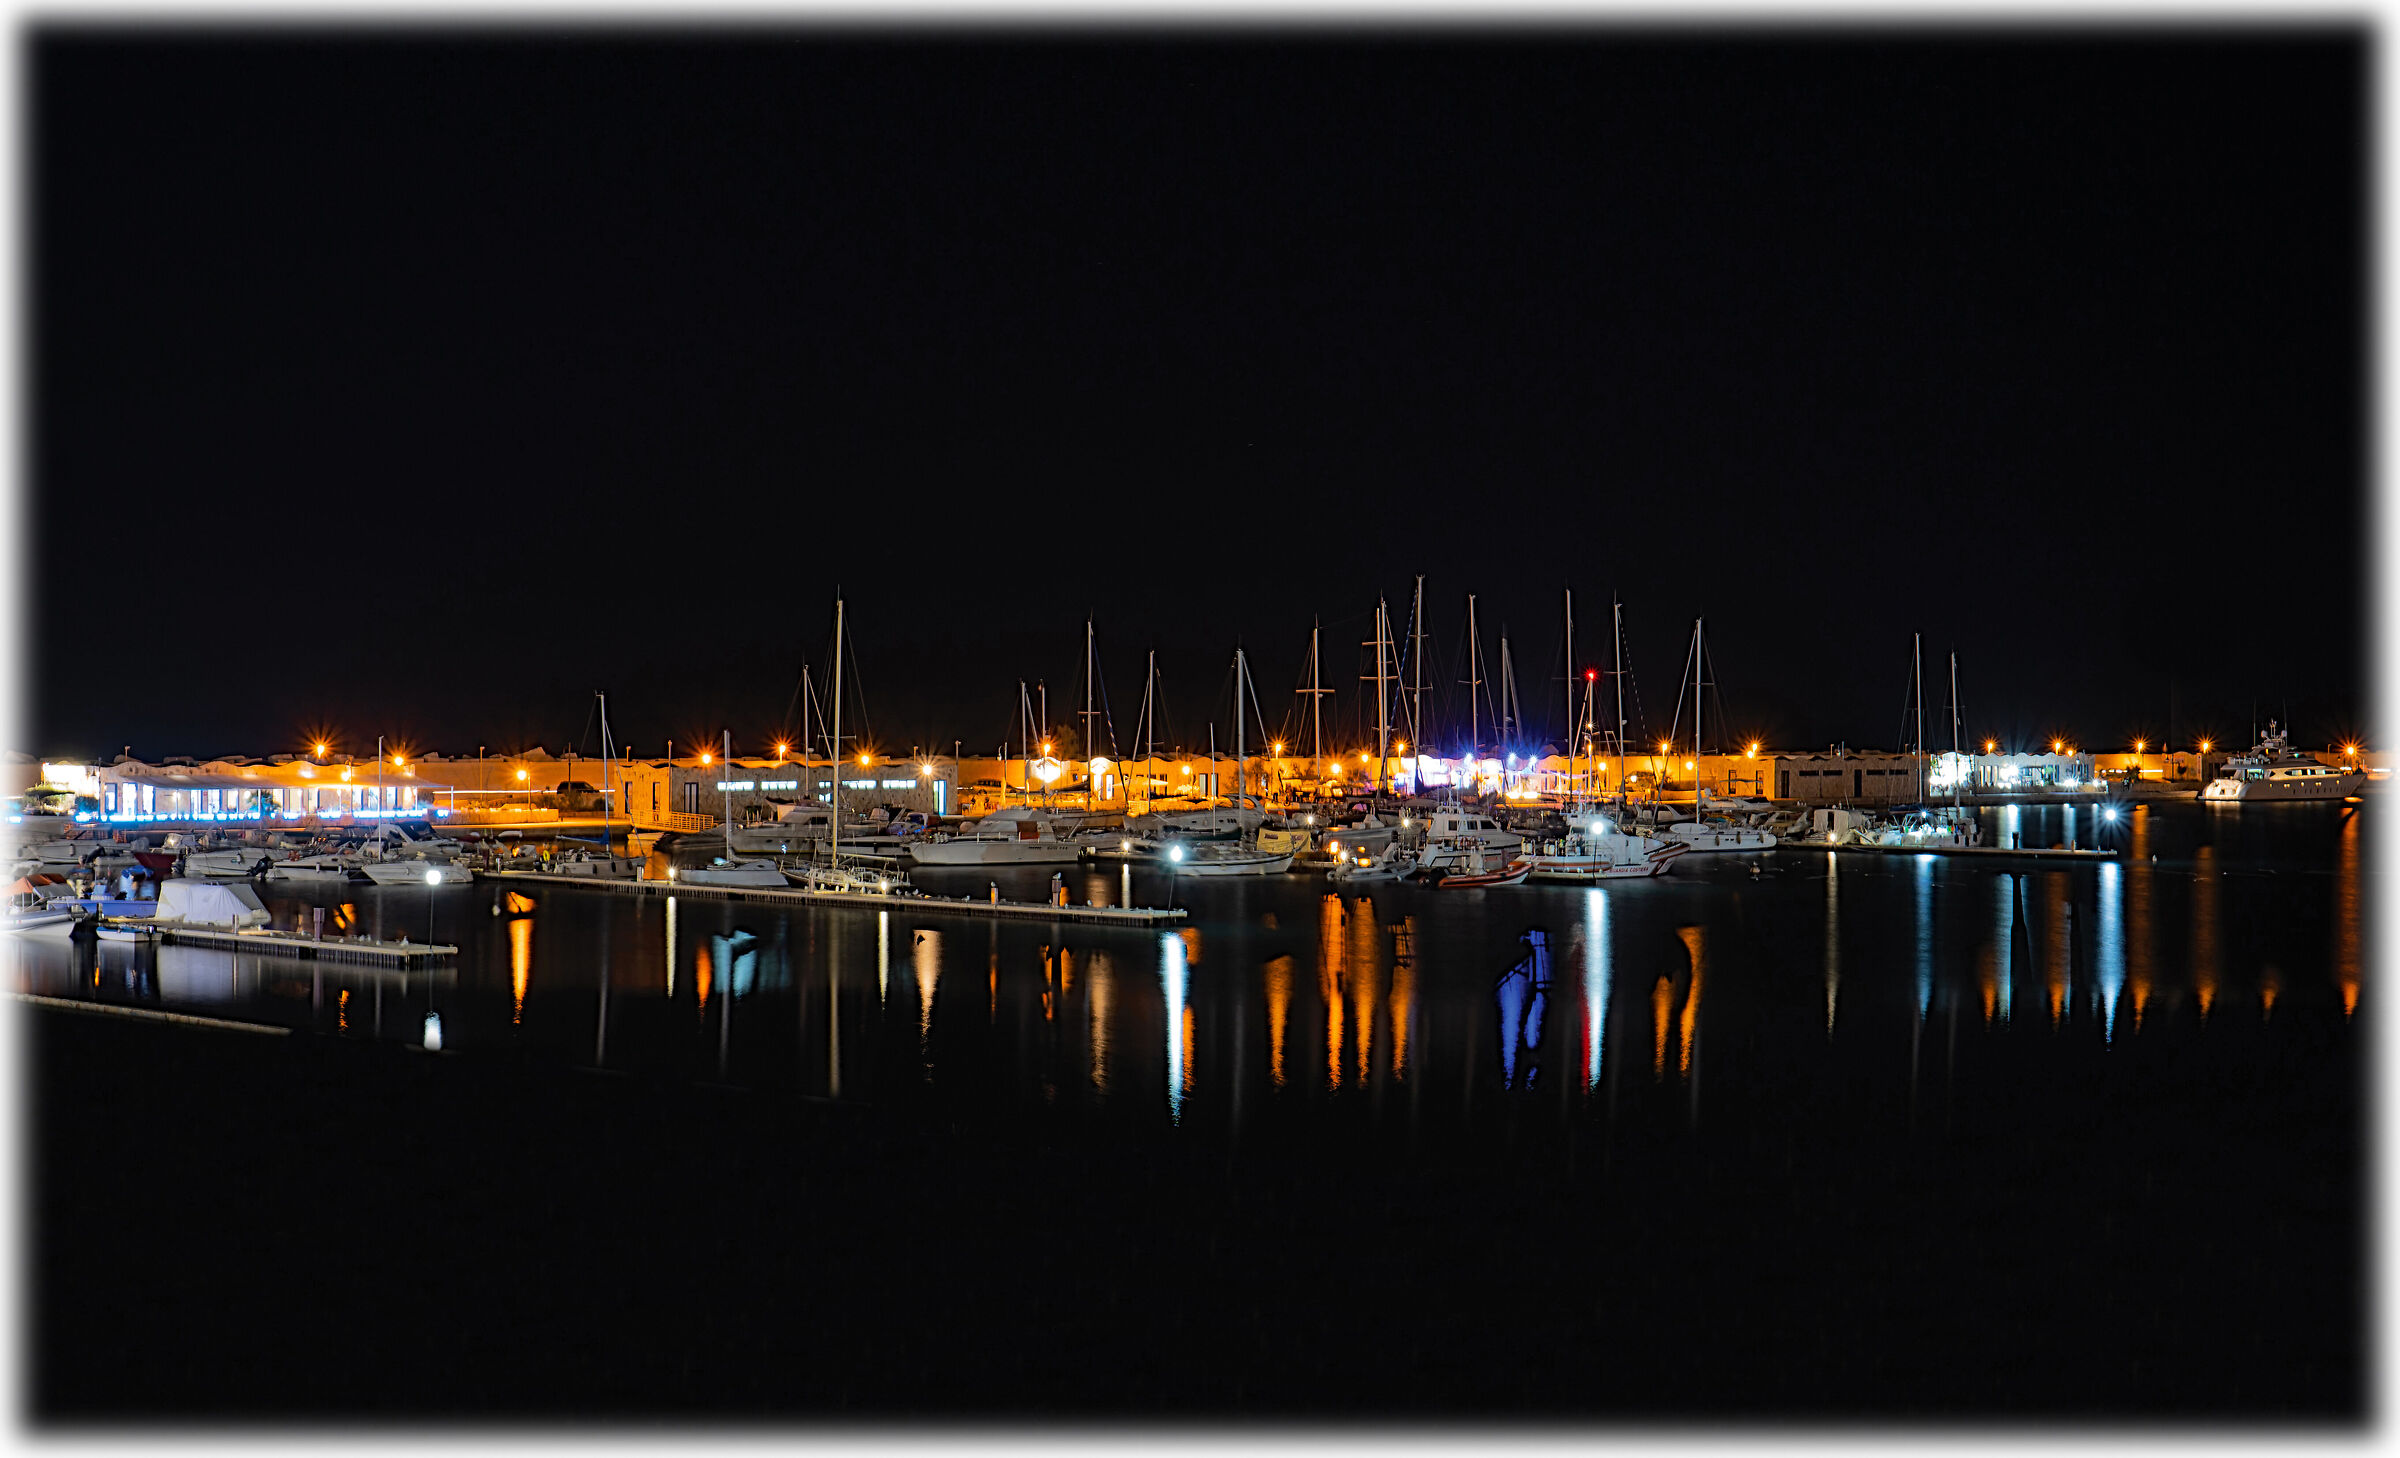 colors and reflections of the port...